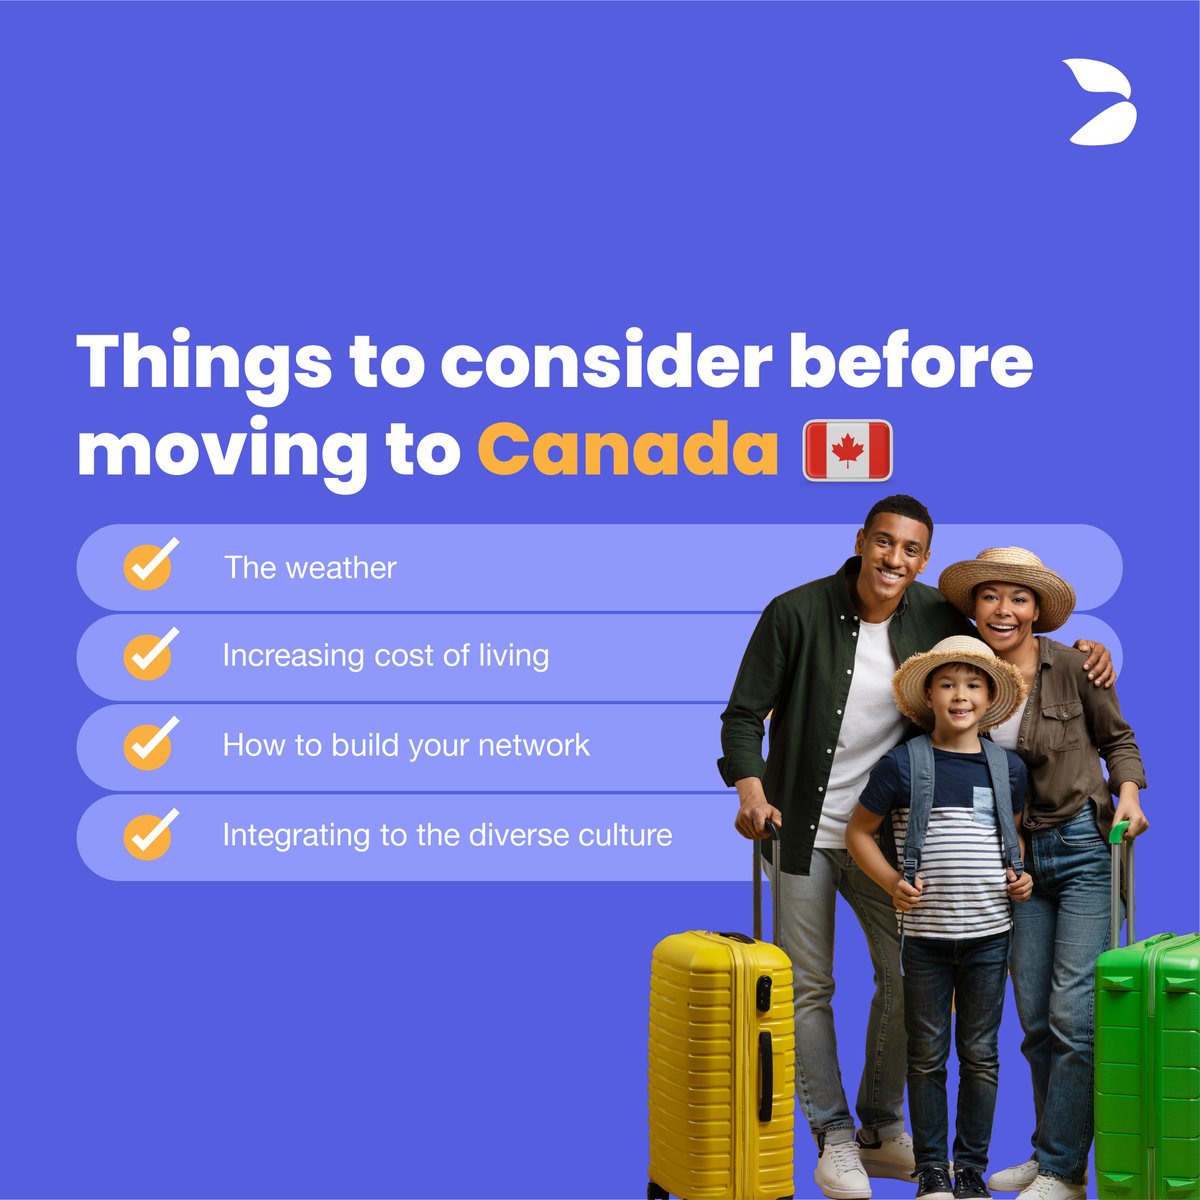 Moving to Canada is an exciting endeavour, but it's essential to consider several factors to ensure a smooth transition and successful settlement.

Here are some key things to think about before making a move:

#MovingToCanada #BlaaizRemit #NewBeginnings